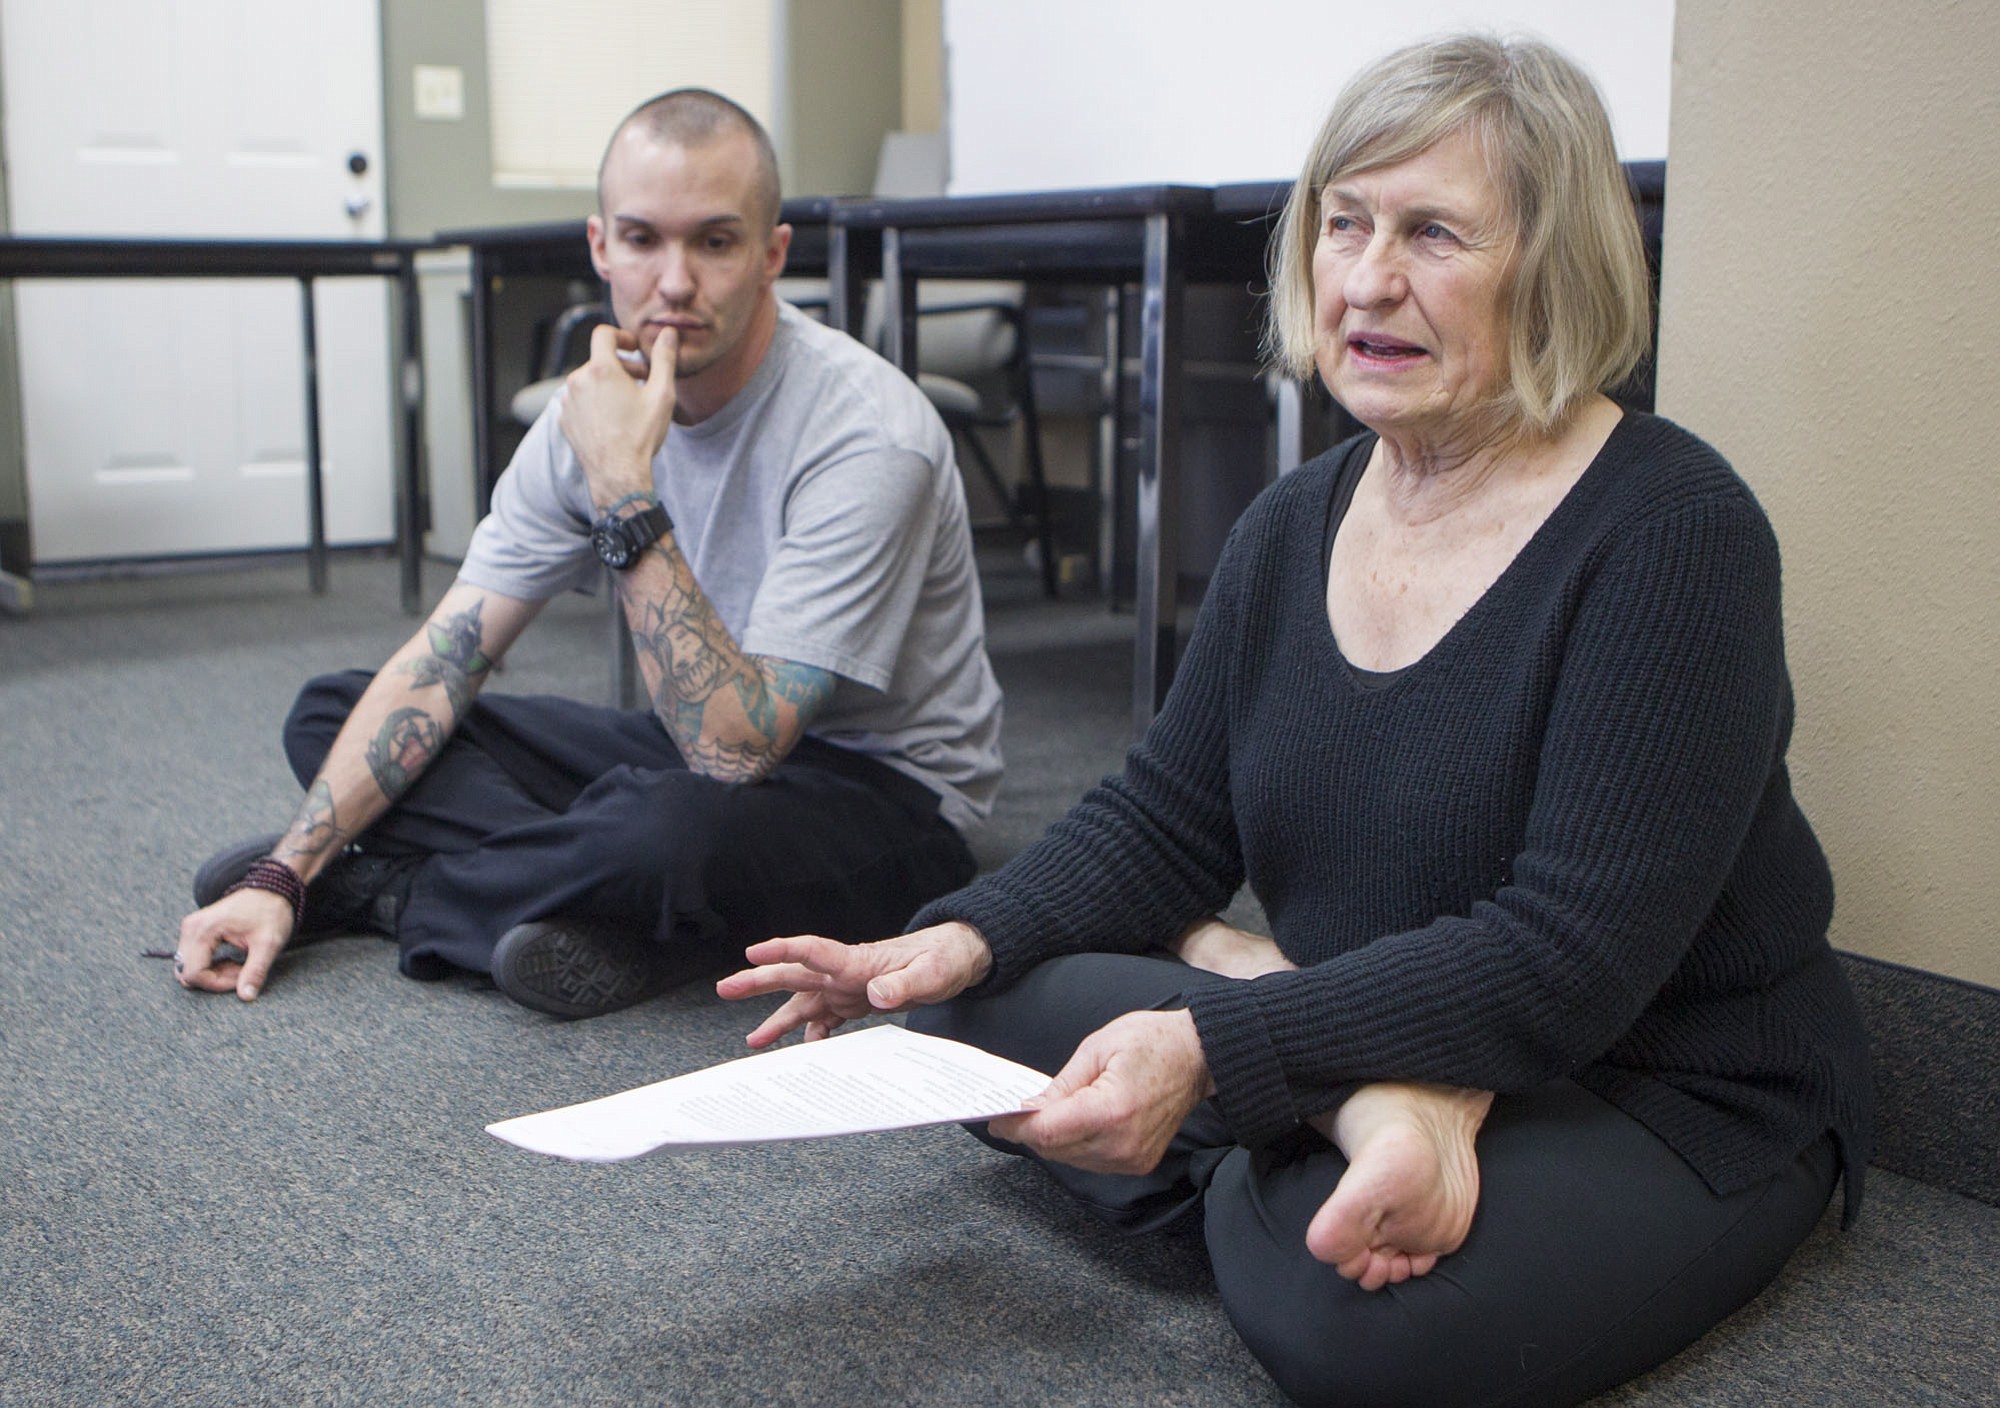 David Hill listens as Peggy McCarthy leads a yoga class at the Vancouver office of the National Alliance on Mental Illness.